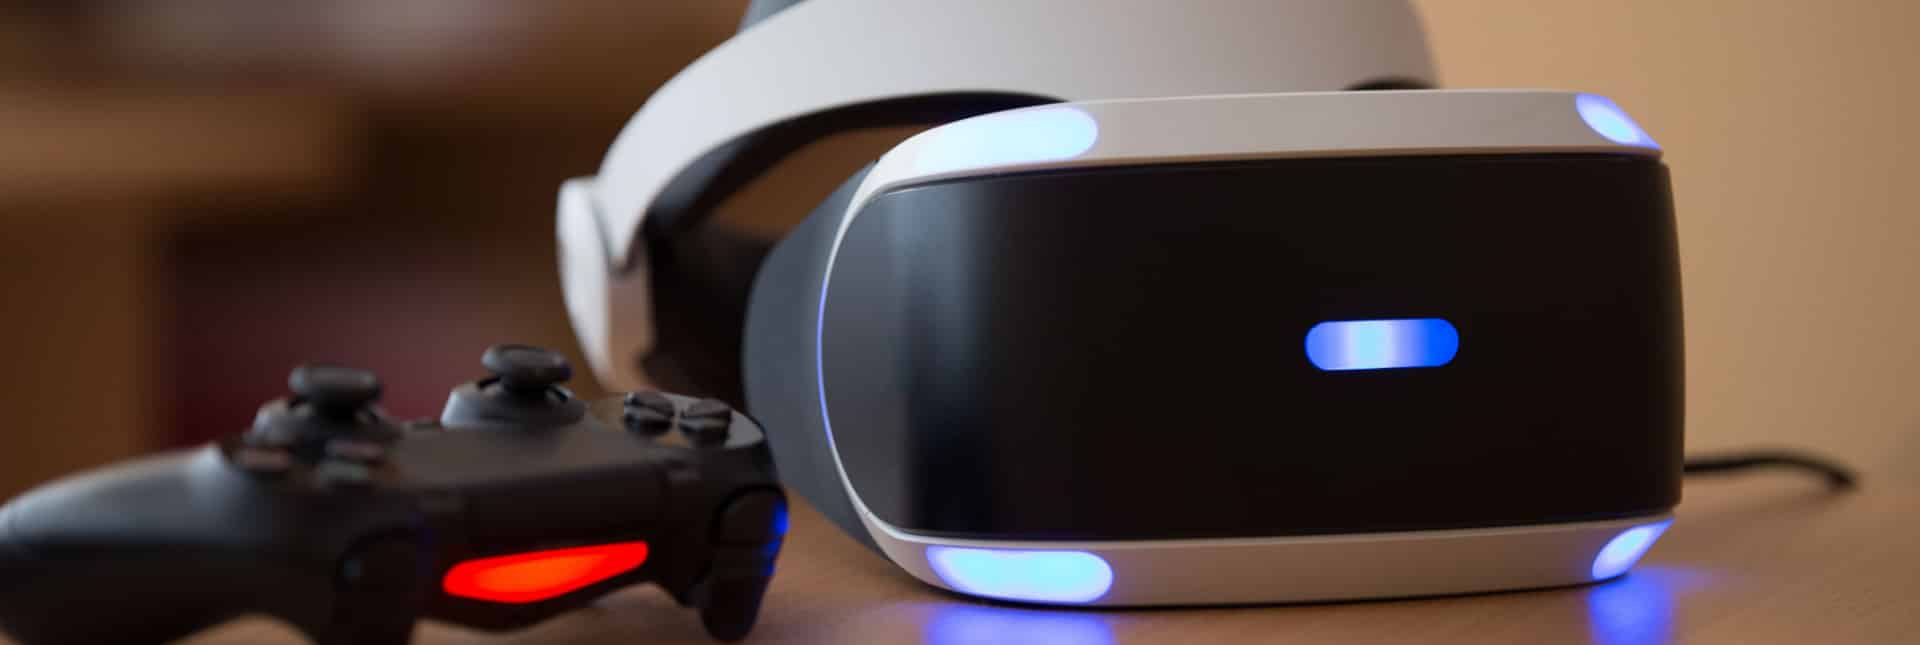 Sony confirms PS VR2 is coming to market 'in early 2023